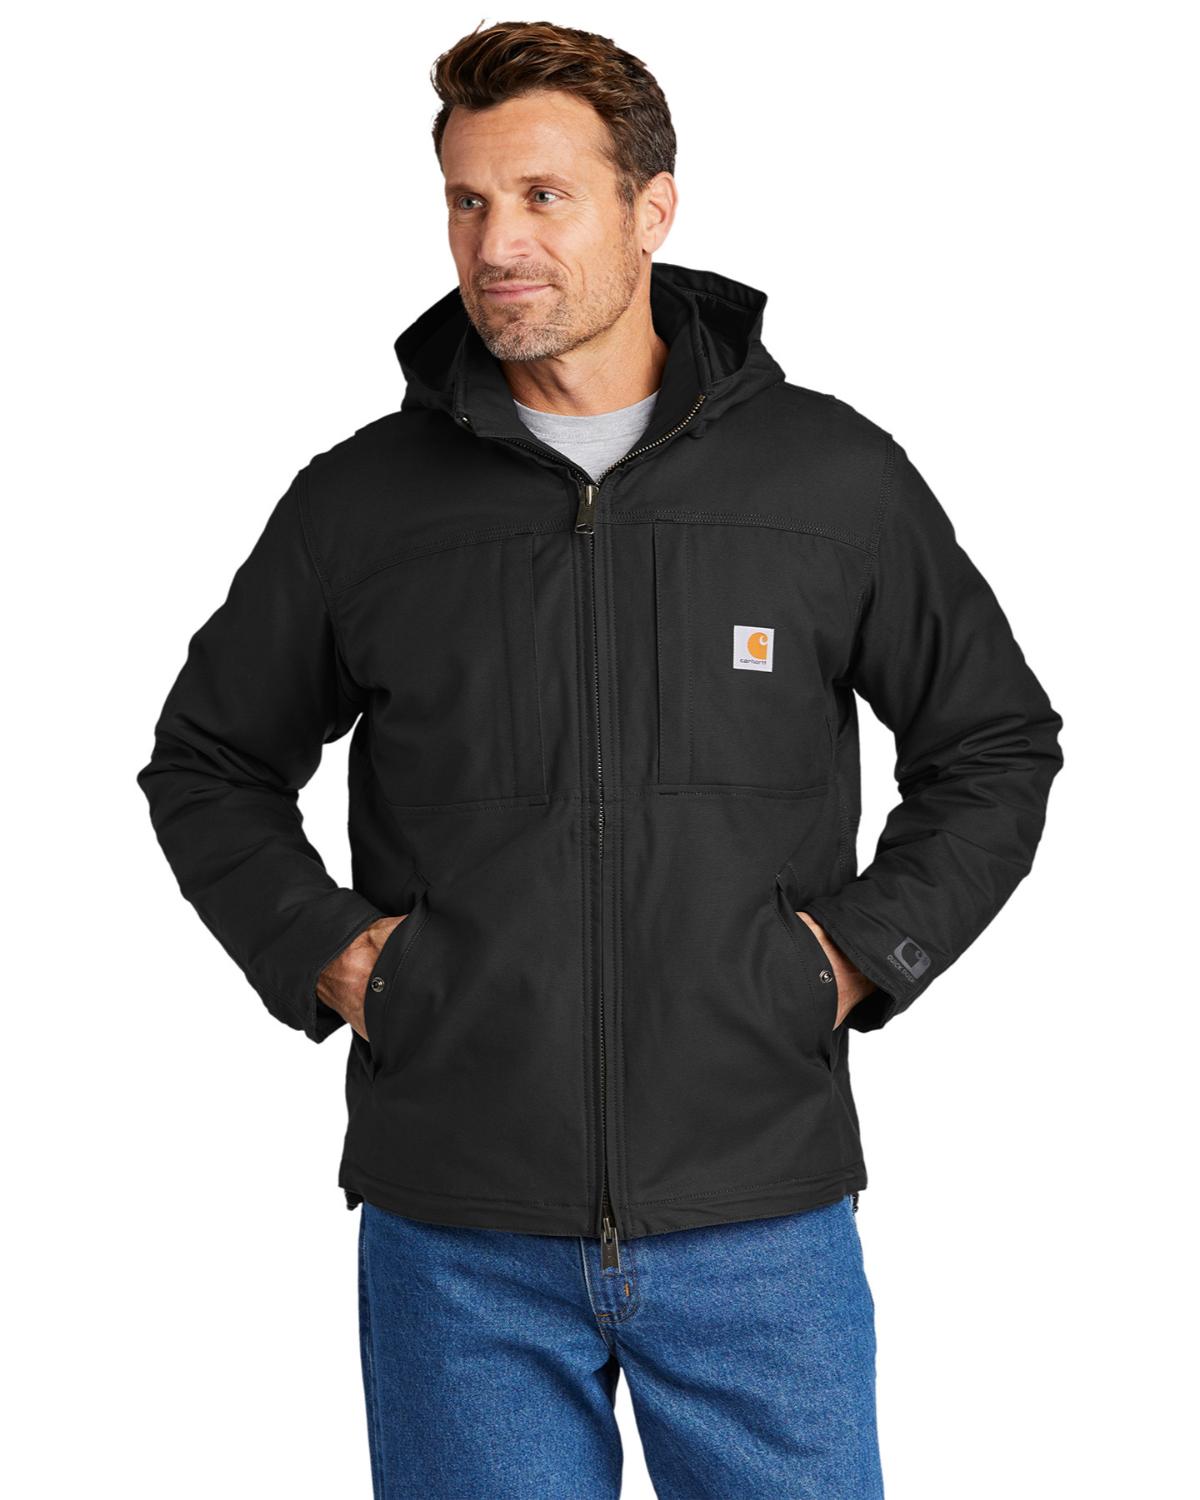 Size Chart for Carhartt CT102207 Full Swing Cryder Jacket - A2ZClothing.com